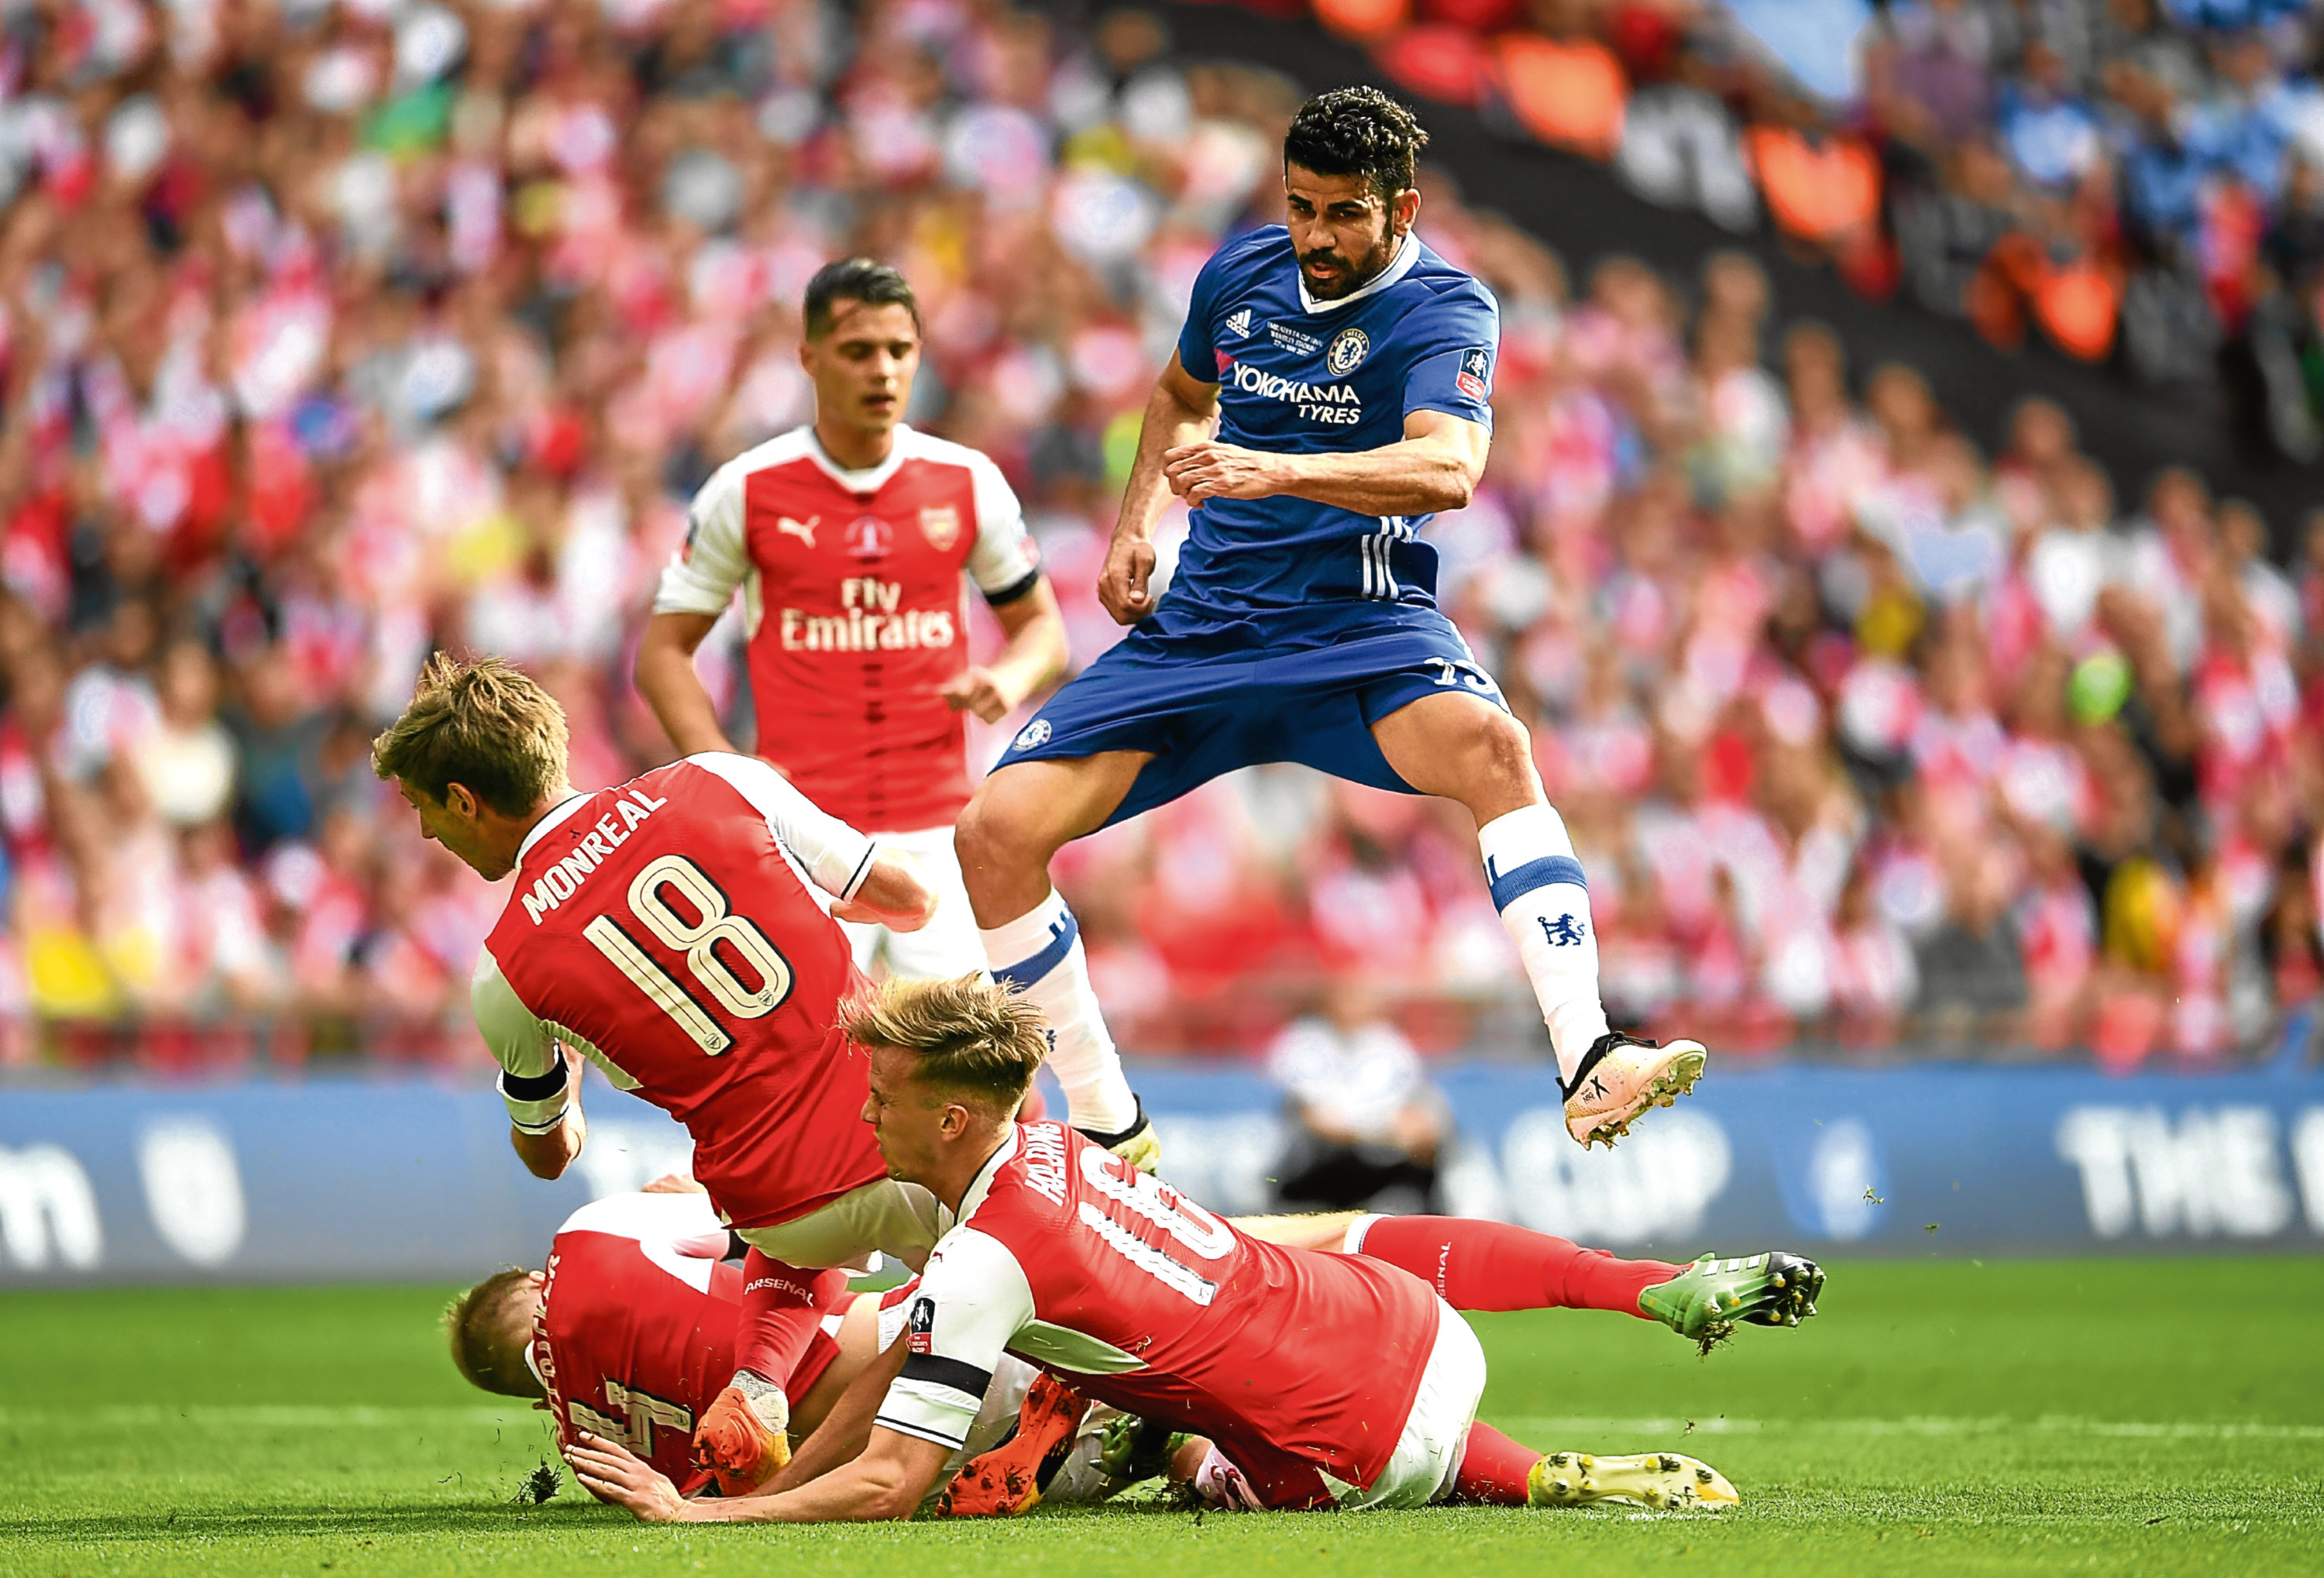 Diego Costa of Chelsea shoots as Nacho Monreal of Arsenal, Rob Holding of Arsenal attempt to block during The Emirates FA Cup Final between Arsenal and Chelsea at Wembley Stadium (Laurence Griffiths/Getty Images)